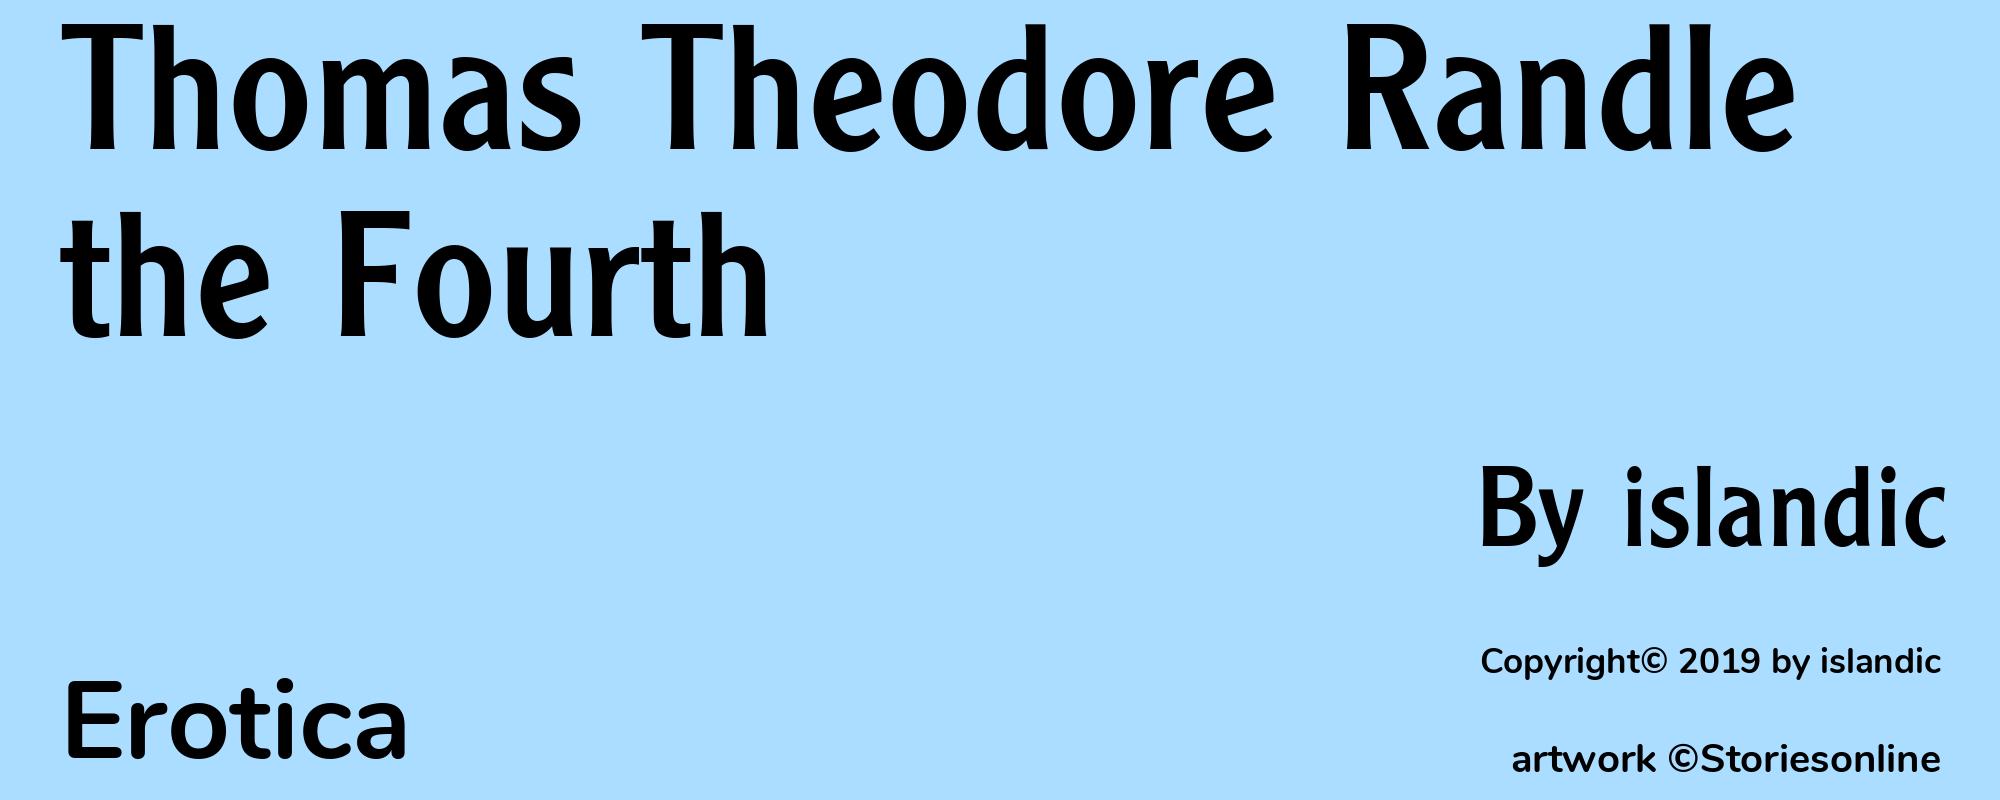 Thomas Theodore Randle the Fourth - Cover